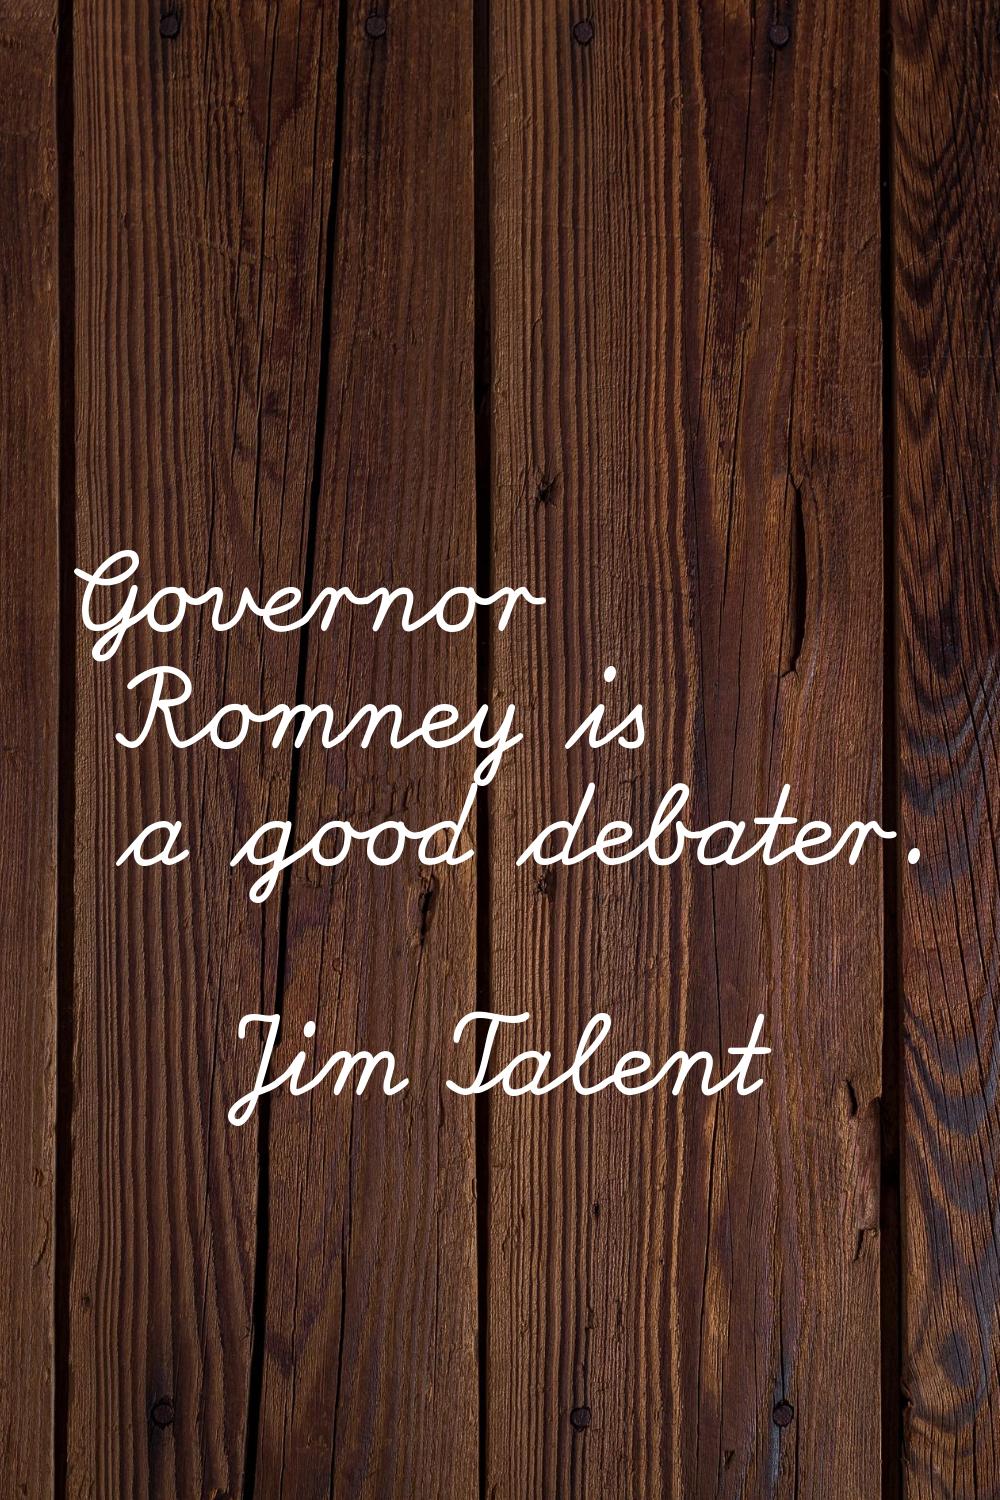 Governor Romney is a good debater.